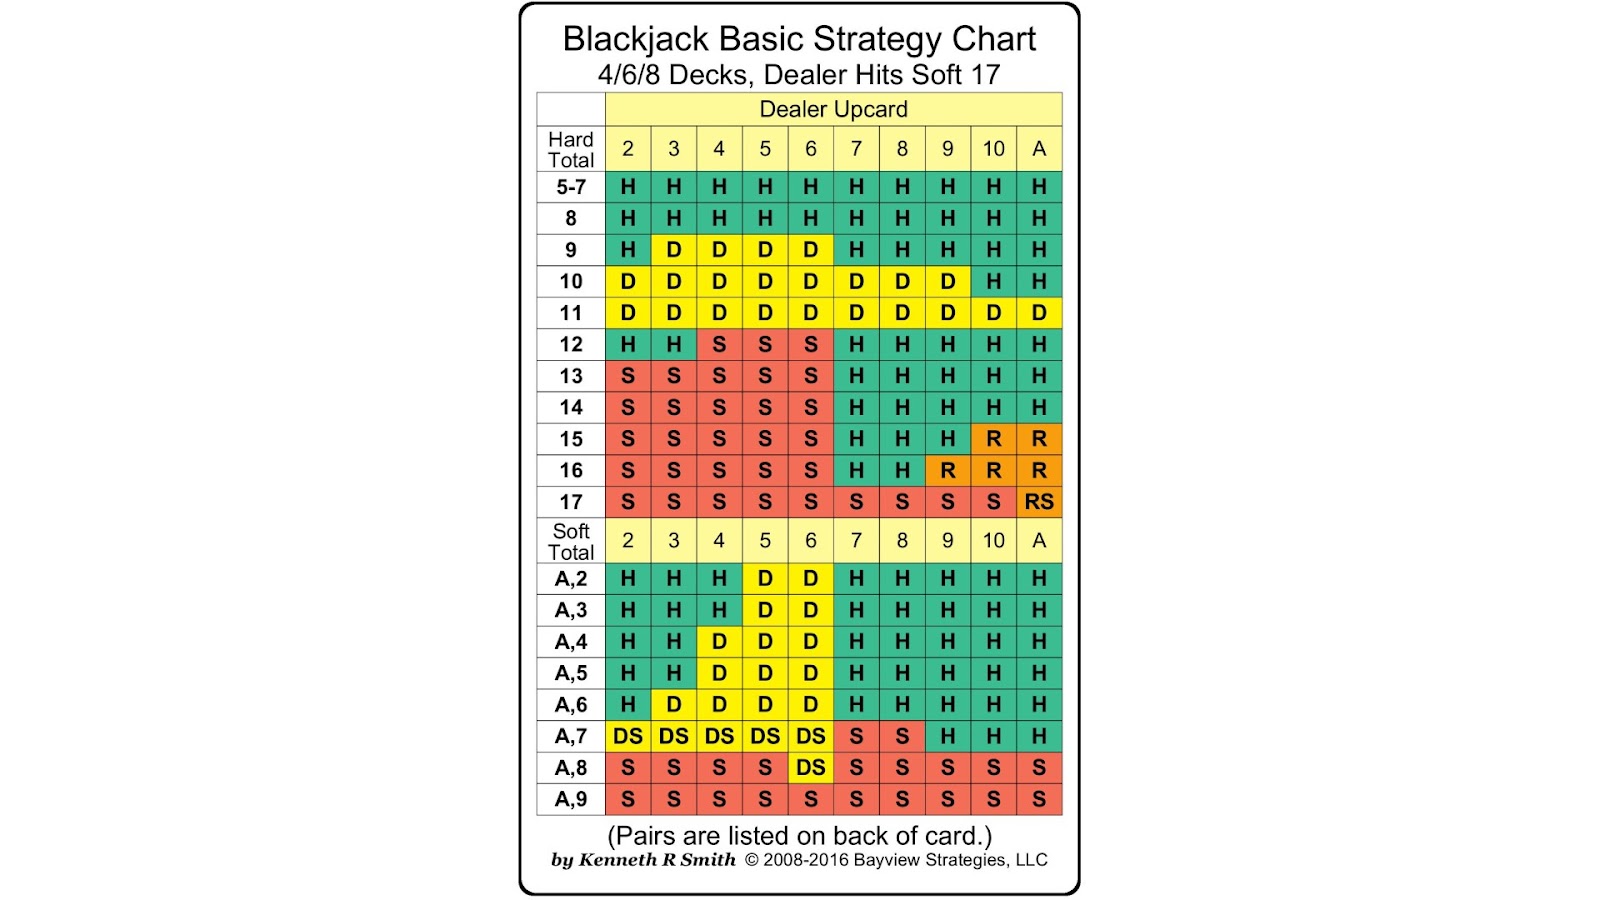 blackjack rules a blackjack basic strategy chart that can be used when learning how to play blackjack